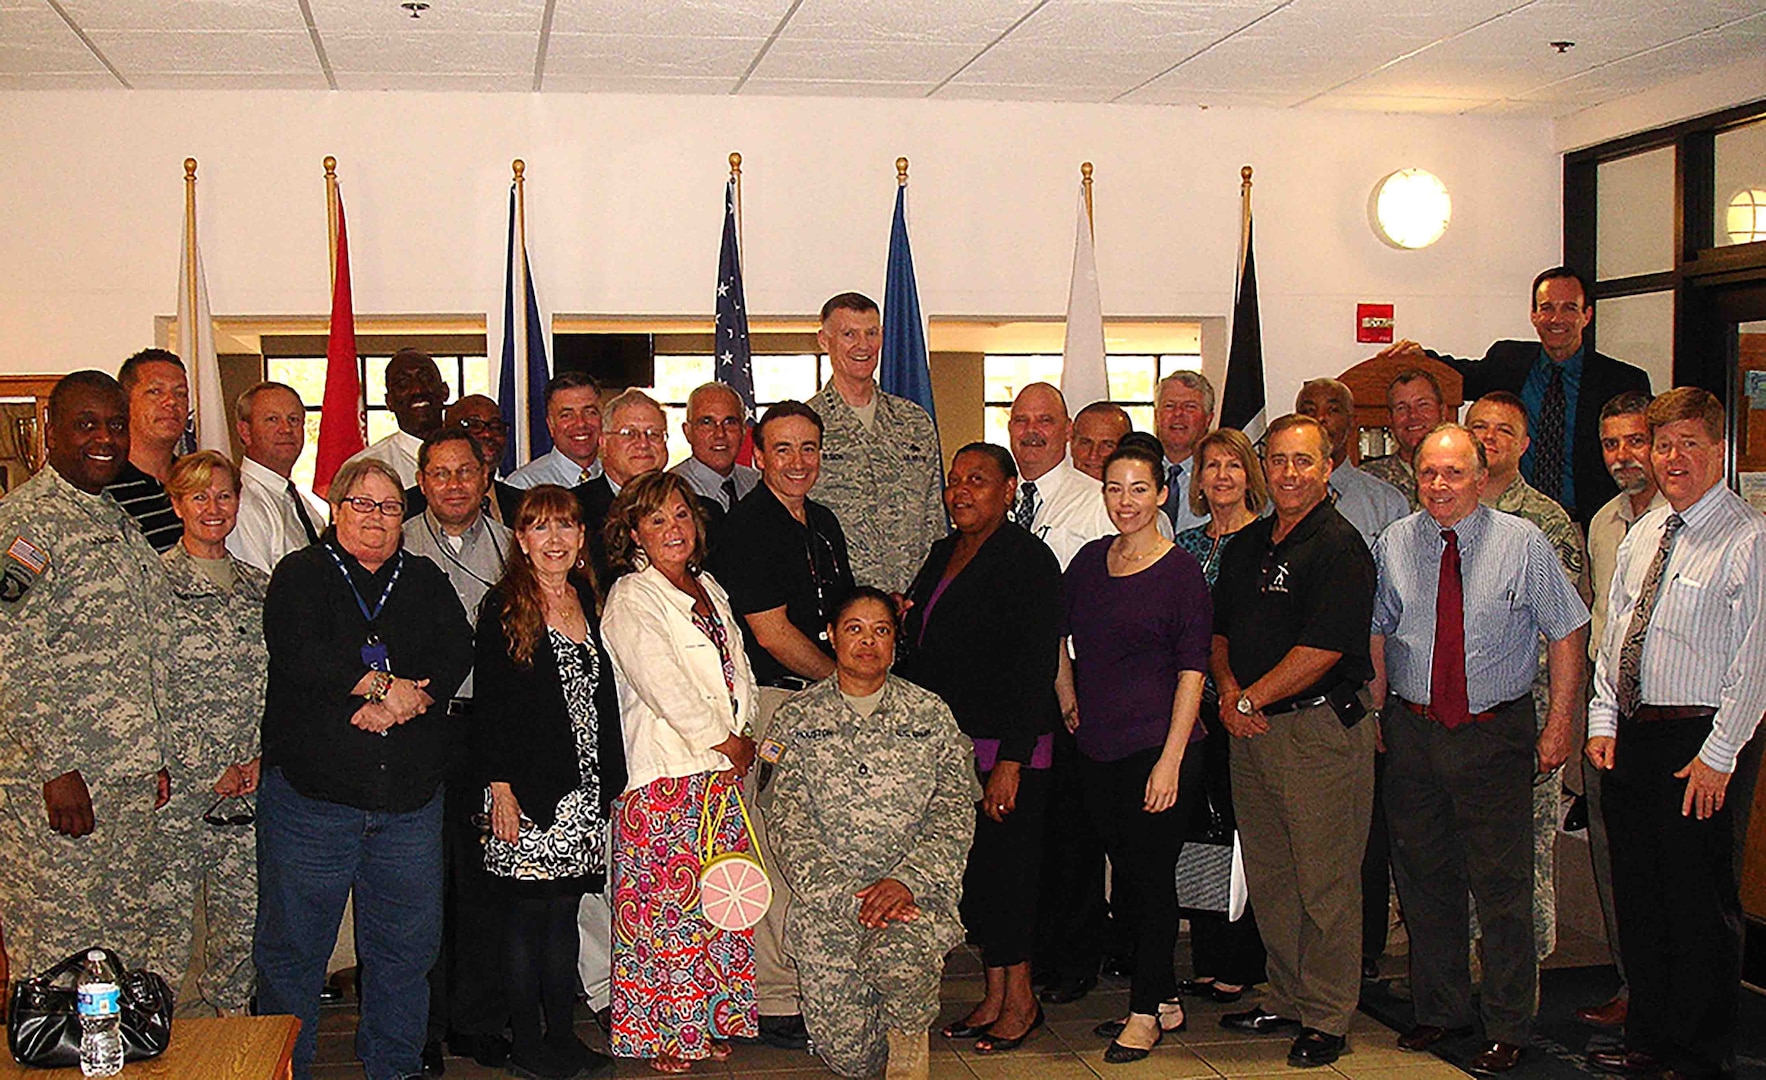 DLA personnel from the Tampa area meet with DLA Director Air Force Lt. Gen. Andy Busch for lunch at the Diner’s Reef Dining Facility at MacDill Air Force Base, Florida, May 5. DLA Central hosted the Director’s visit to meet with leaders at U.S. Central Command and U.S. Special Operations Command, as well as local DLA activities.